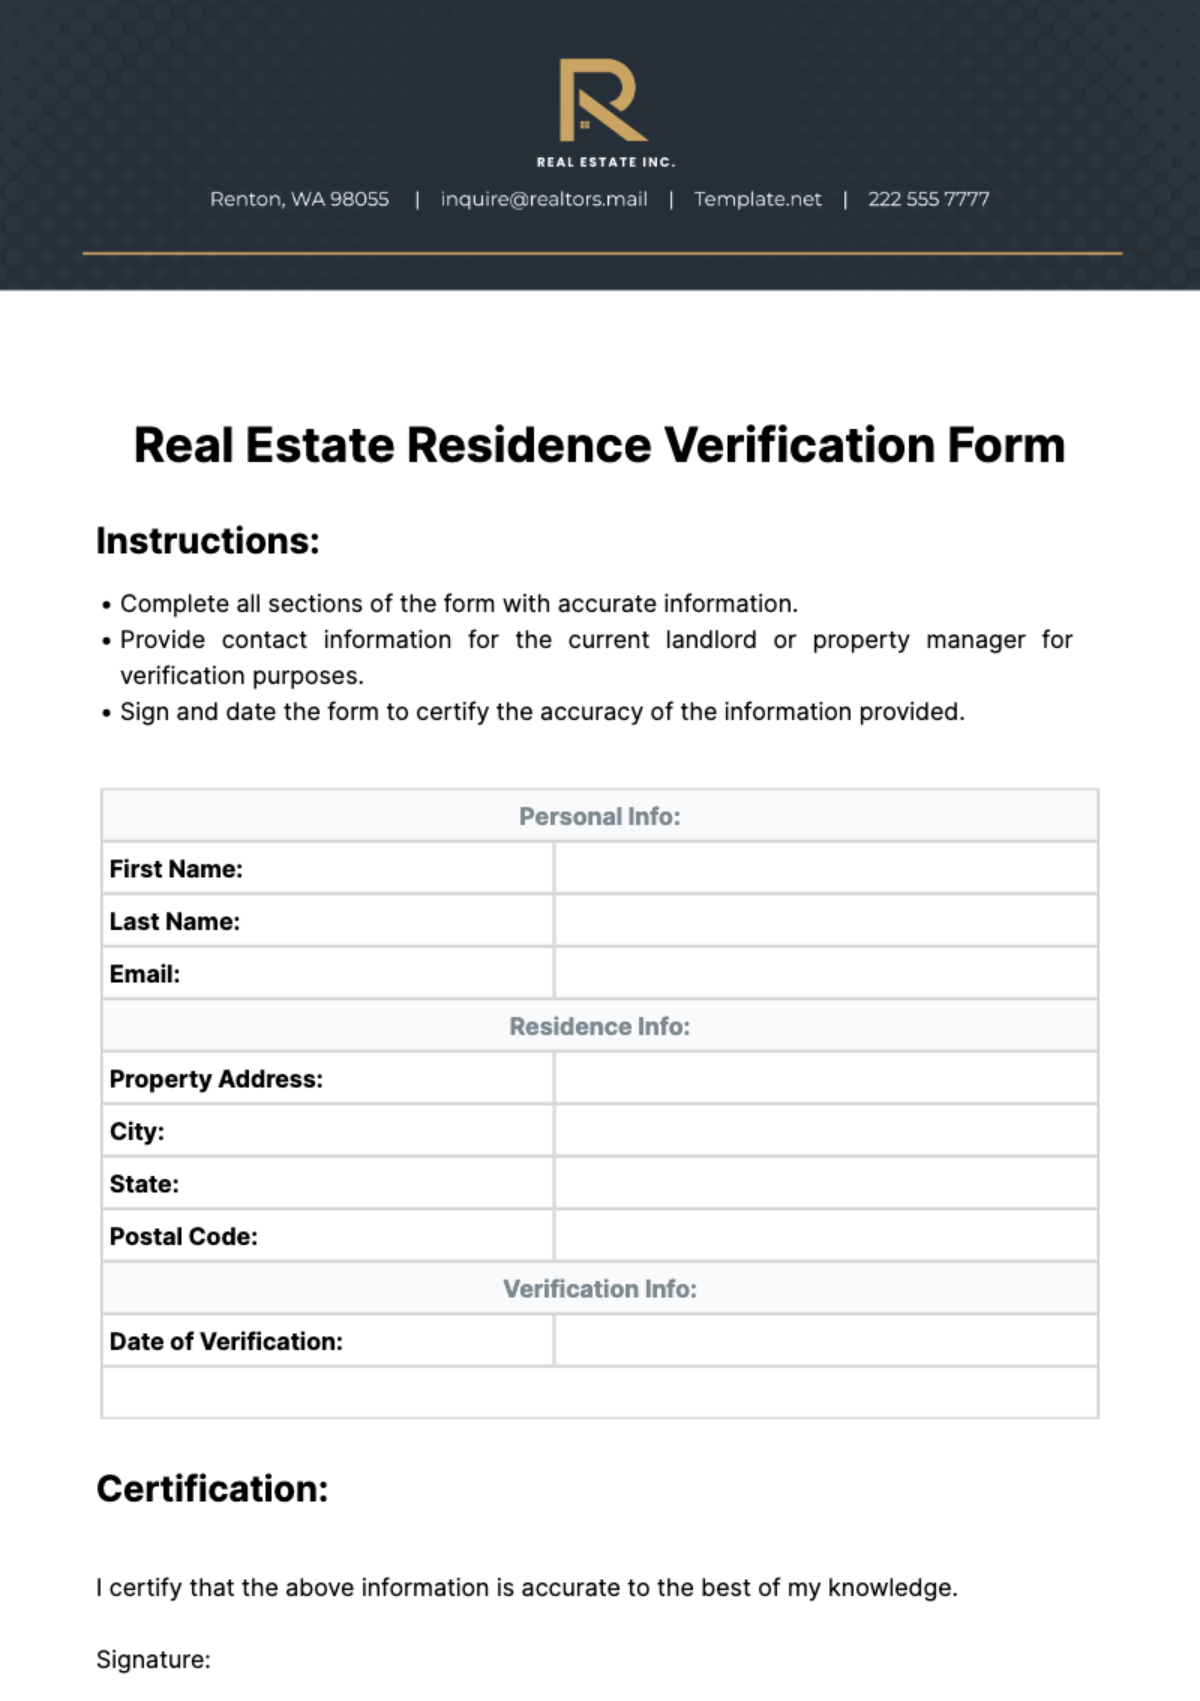 Free Real Estate Residence Verification Form Template